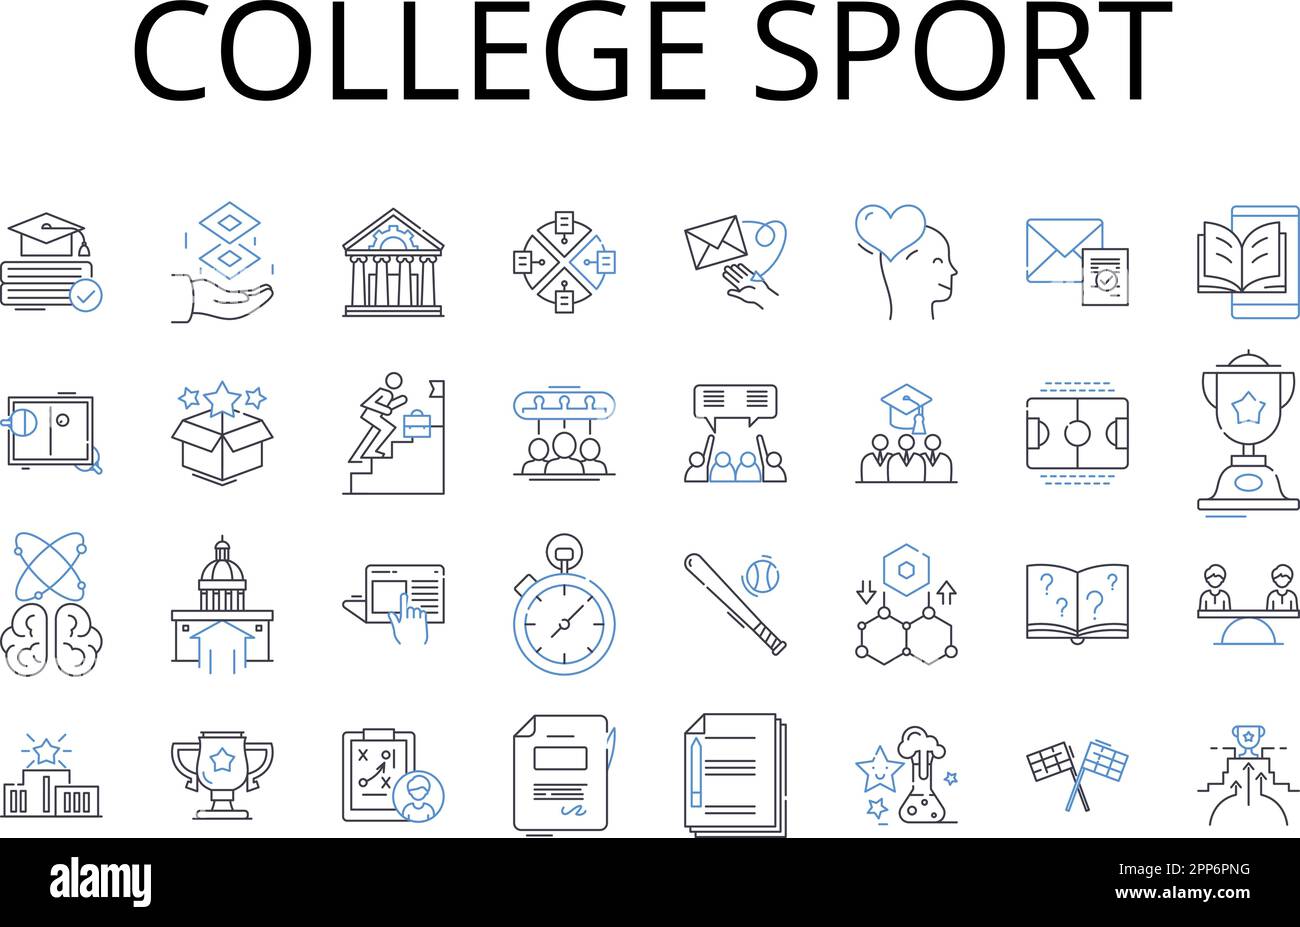 College sport line icons collection. Athletics, Varsity sports, Intramurals, Intercollegiate sports, Team sports, Competitive sports, Extramural Stock Vector